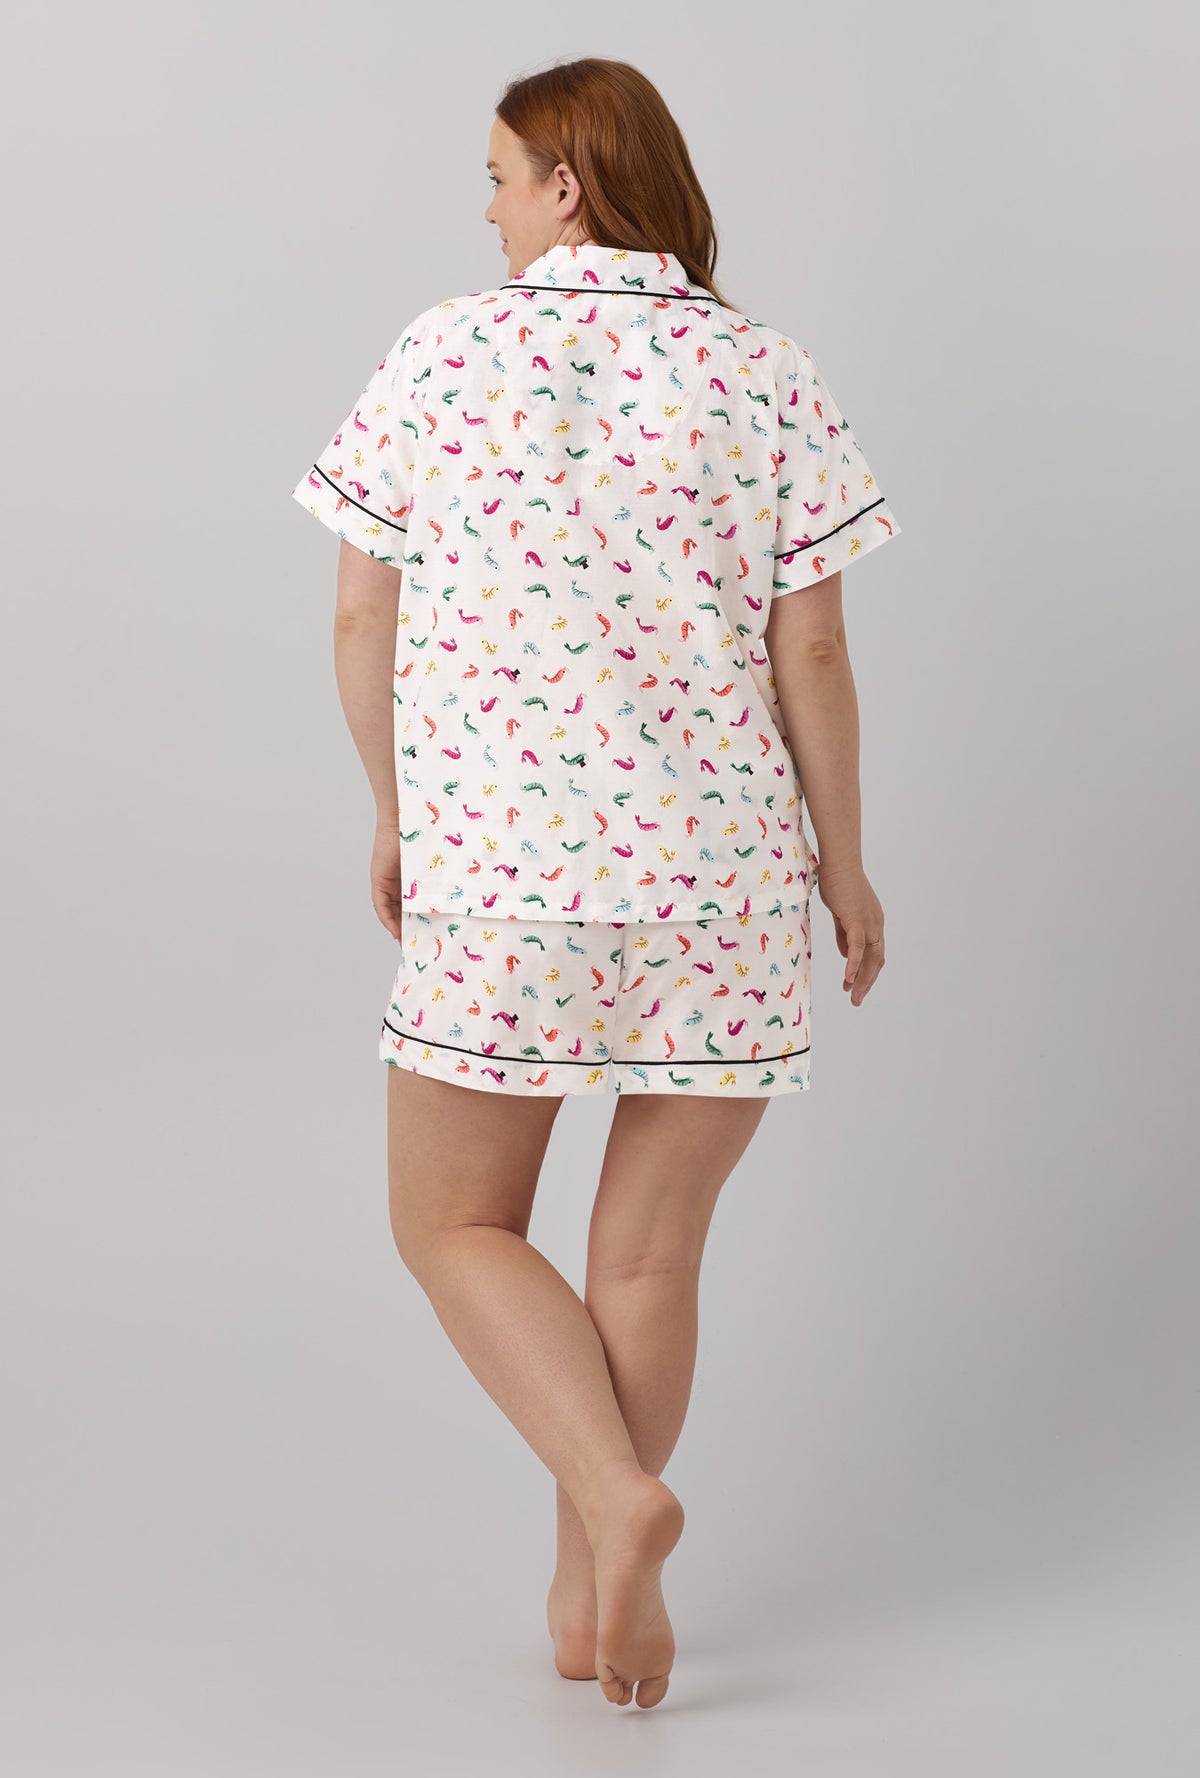 A lady wearing Short Sleeve Classic Woven Cotton Silk PJ Set with Shrimply The Best print